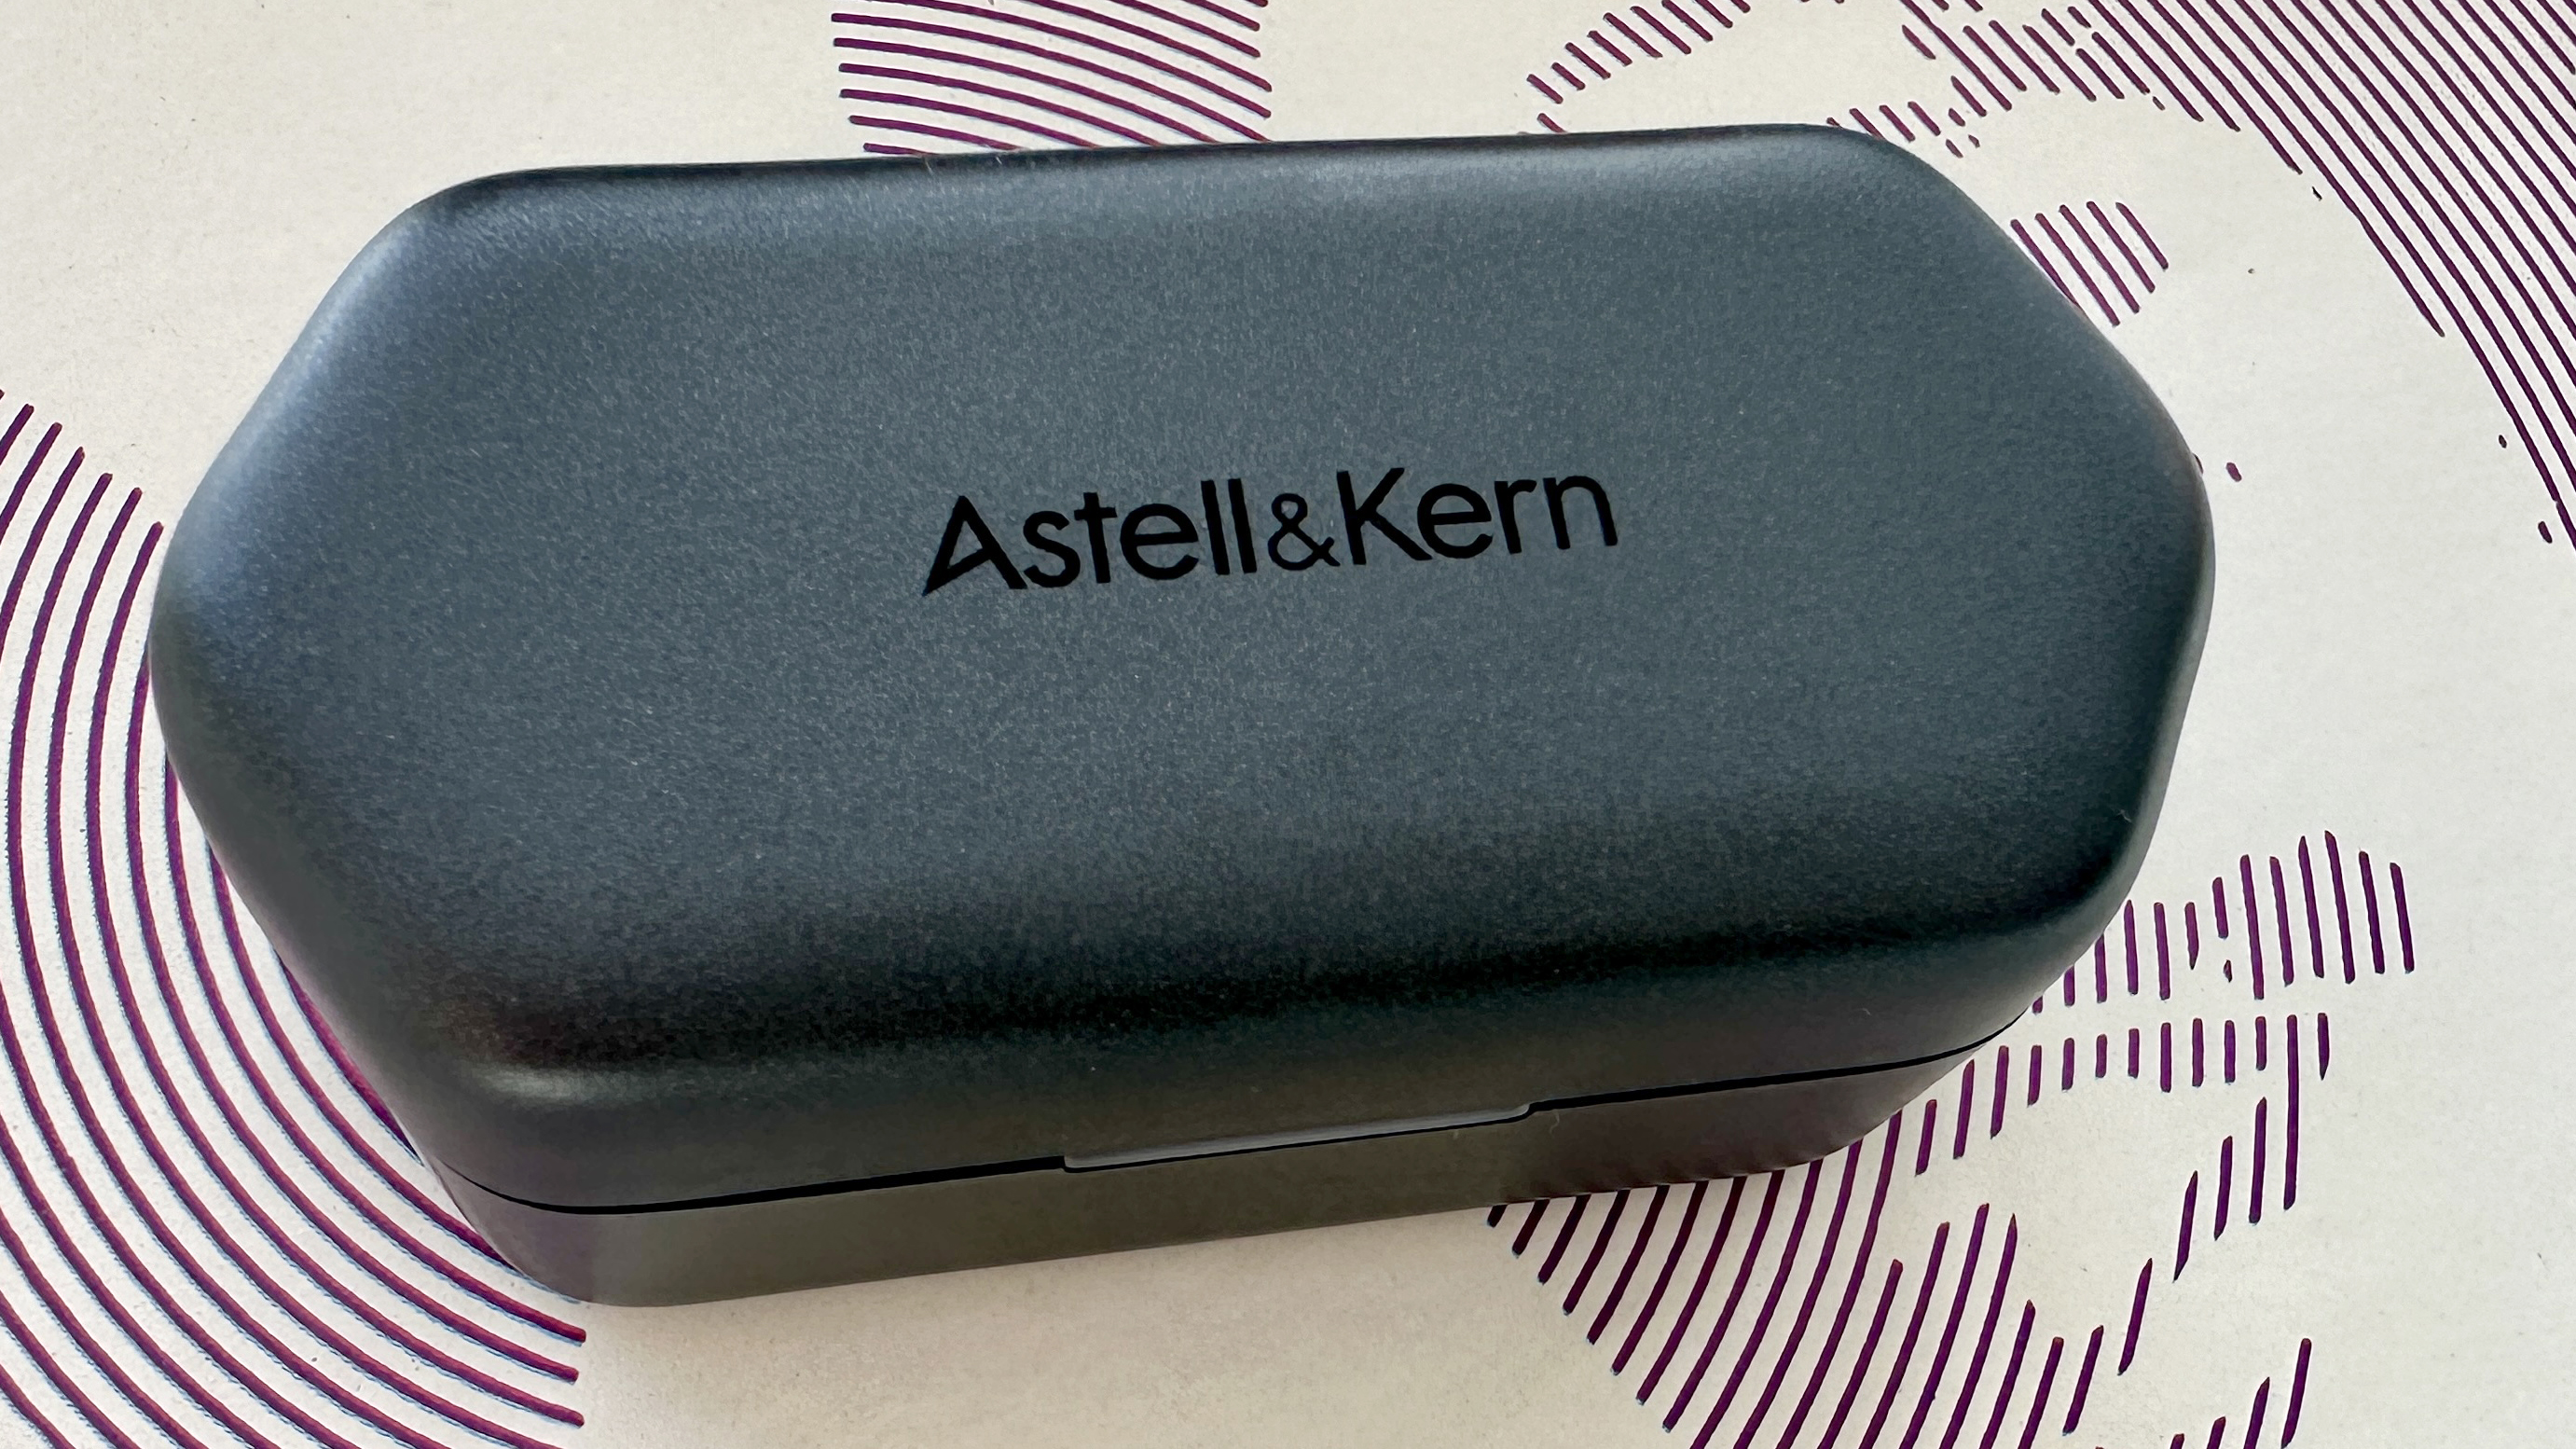 android, astell & kern uw100 mkii review: insightful sound, cumbersome design